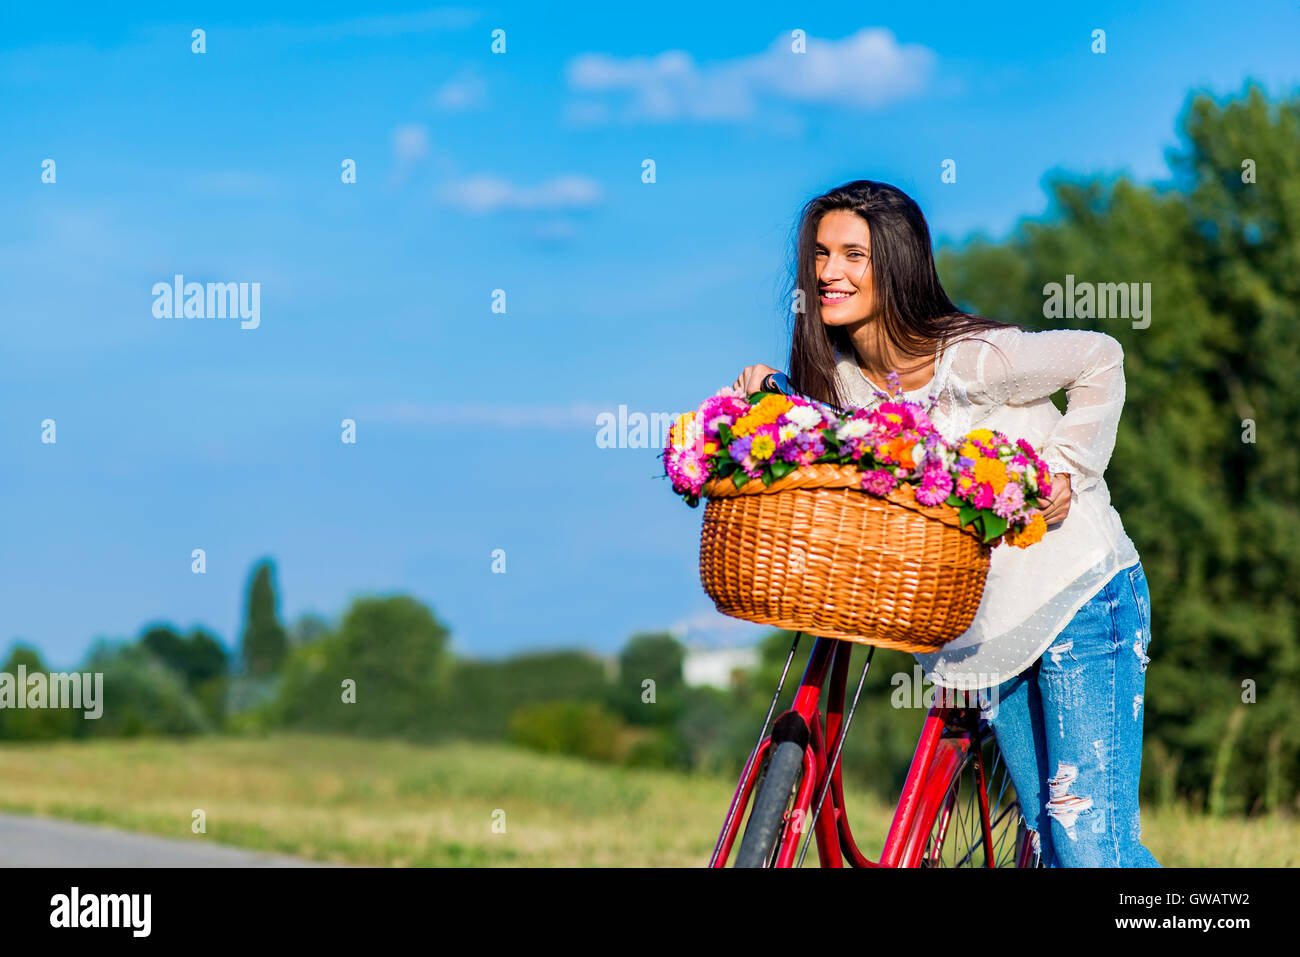 Young girl posing by a bicycle with a basket full of flowers Stock Photo